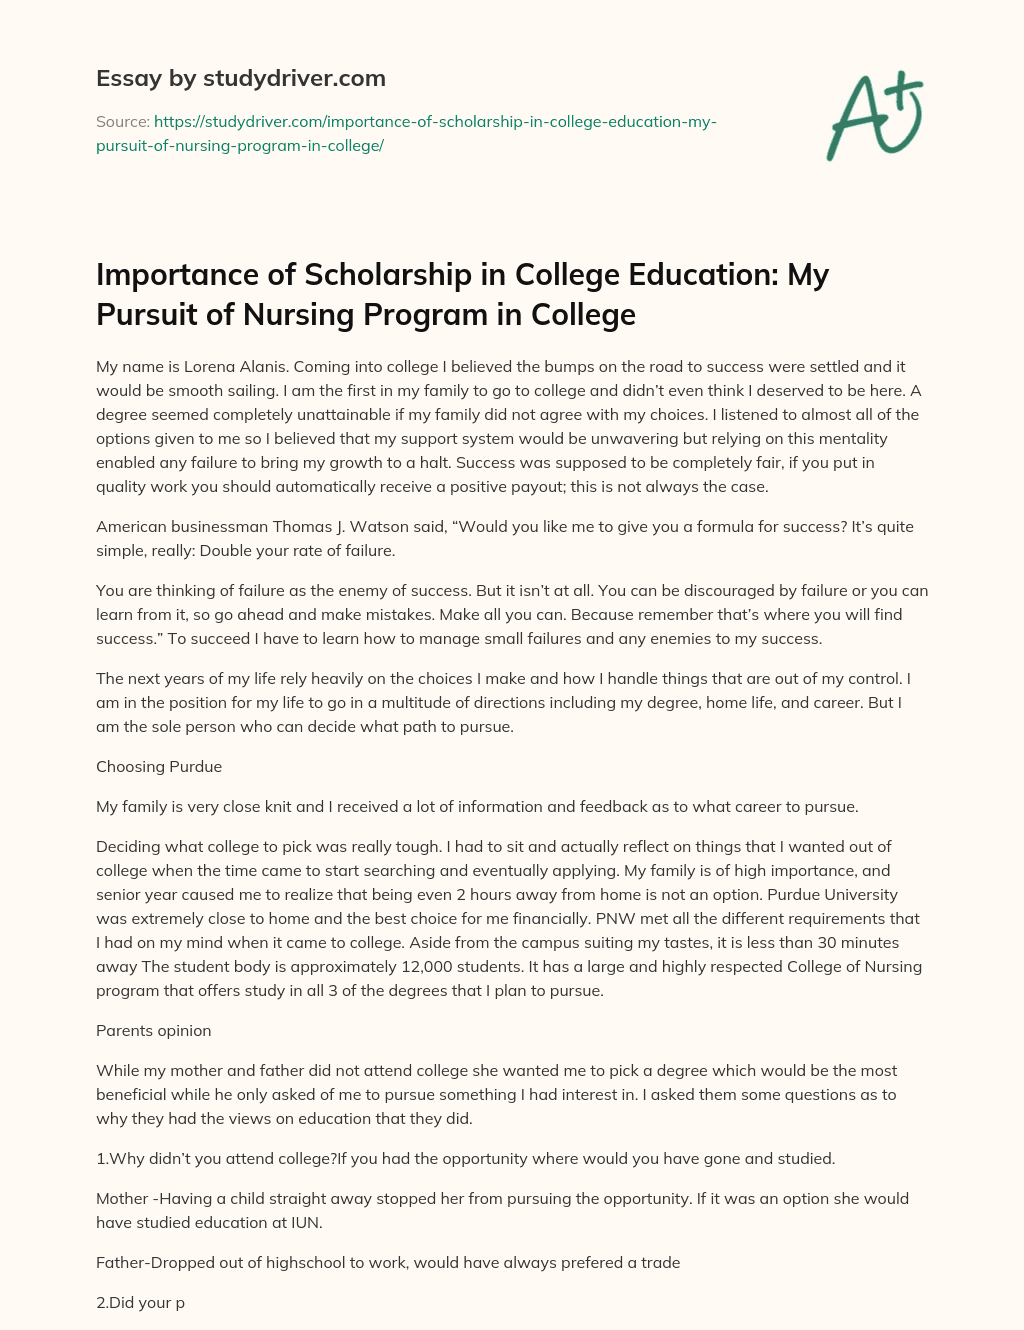 Importance of Scholarship in College Education: my Pursuit of Nursing Program in College essay